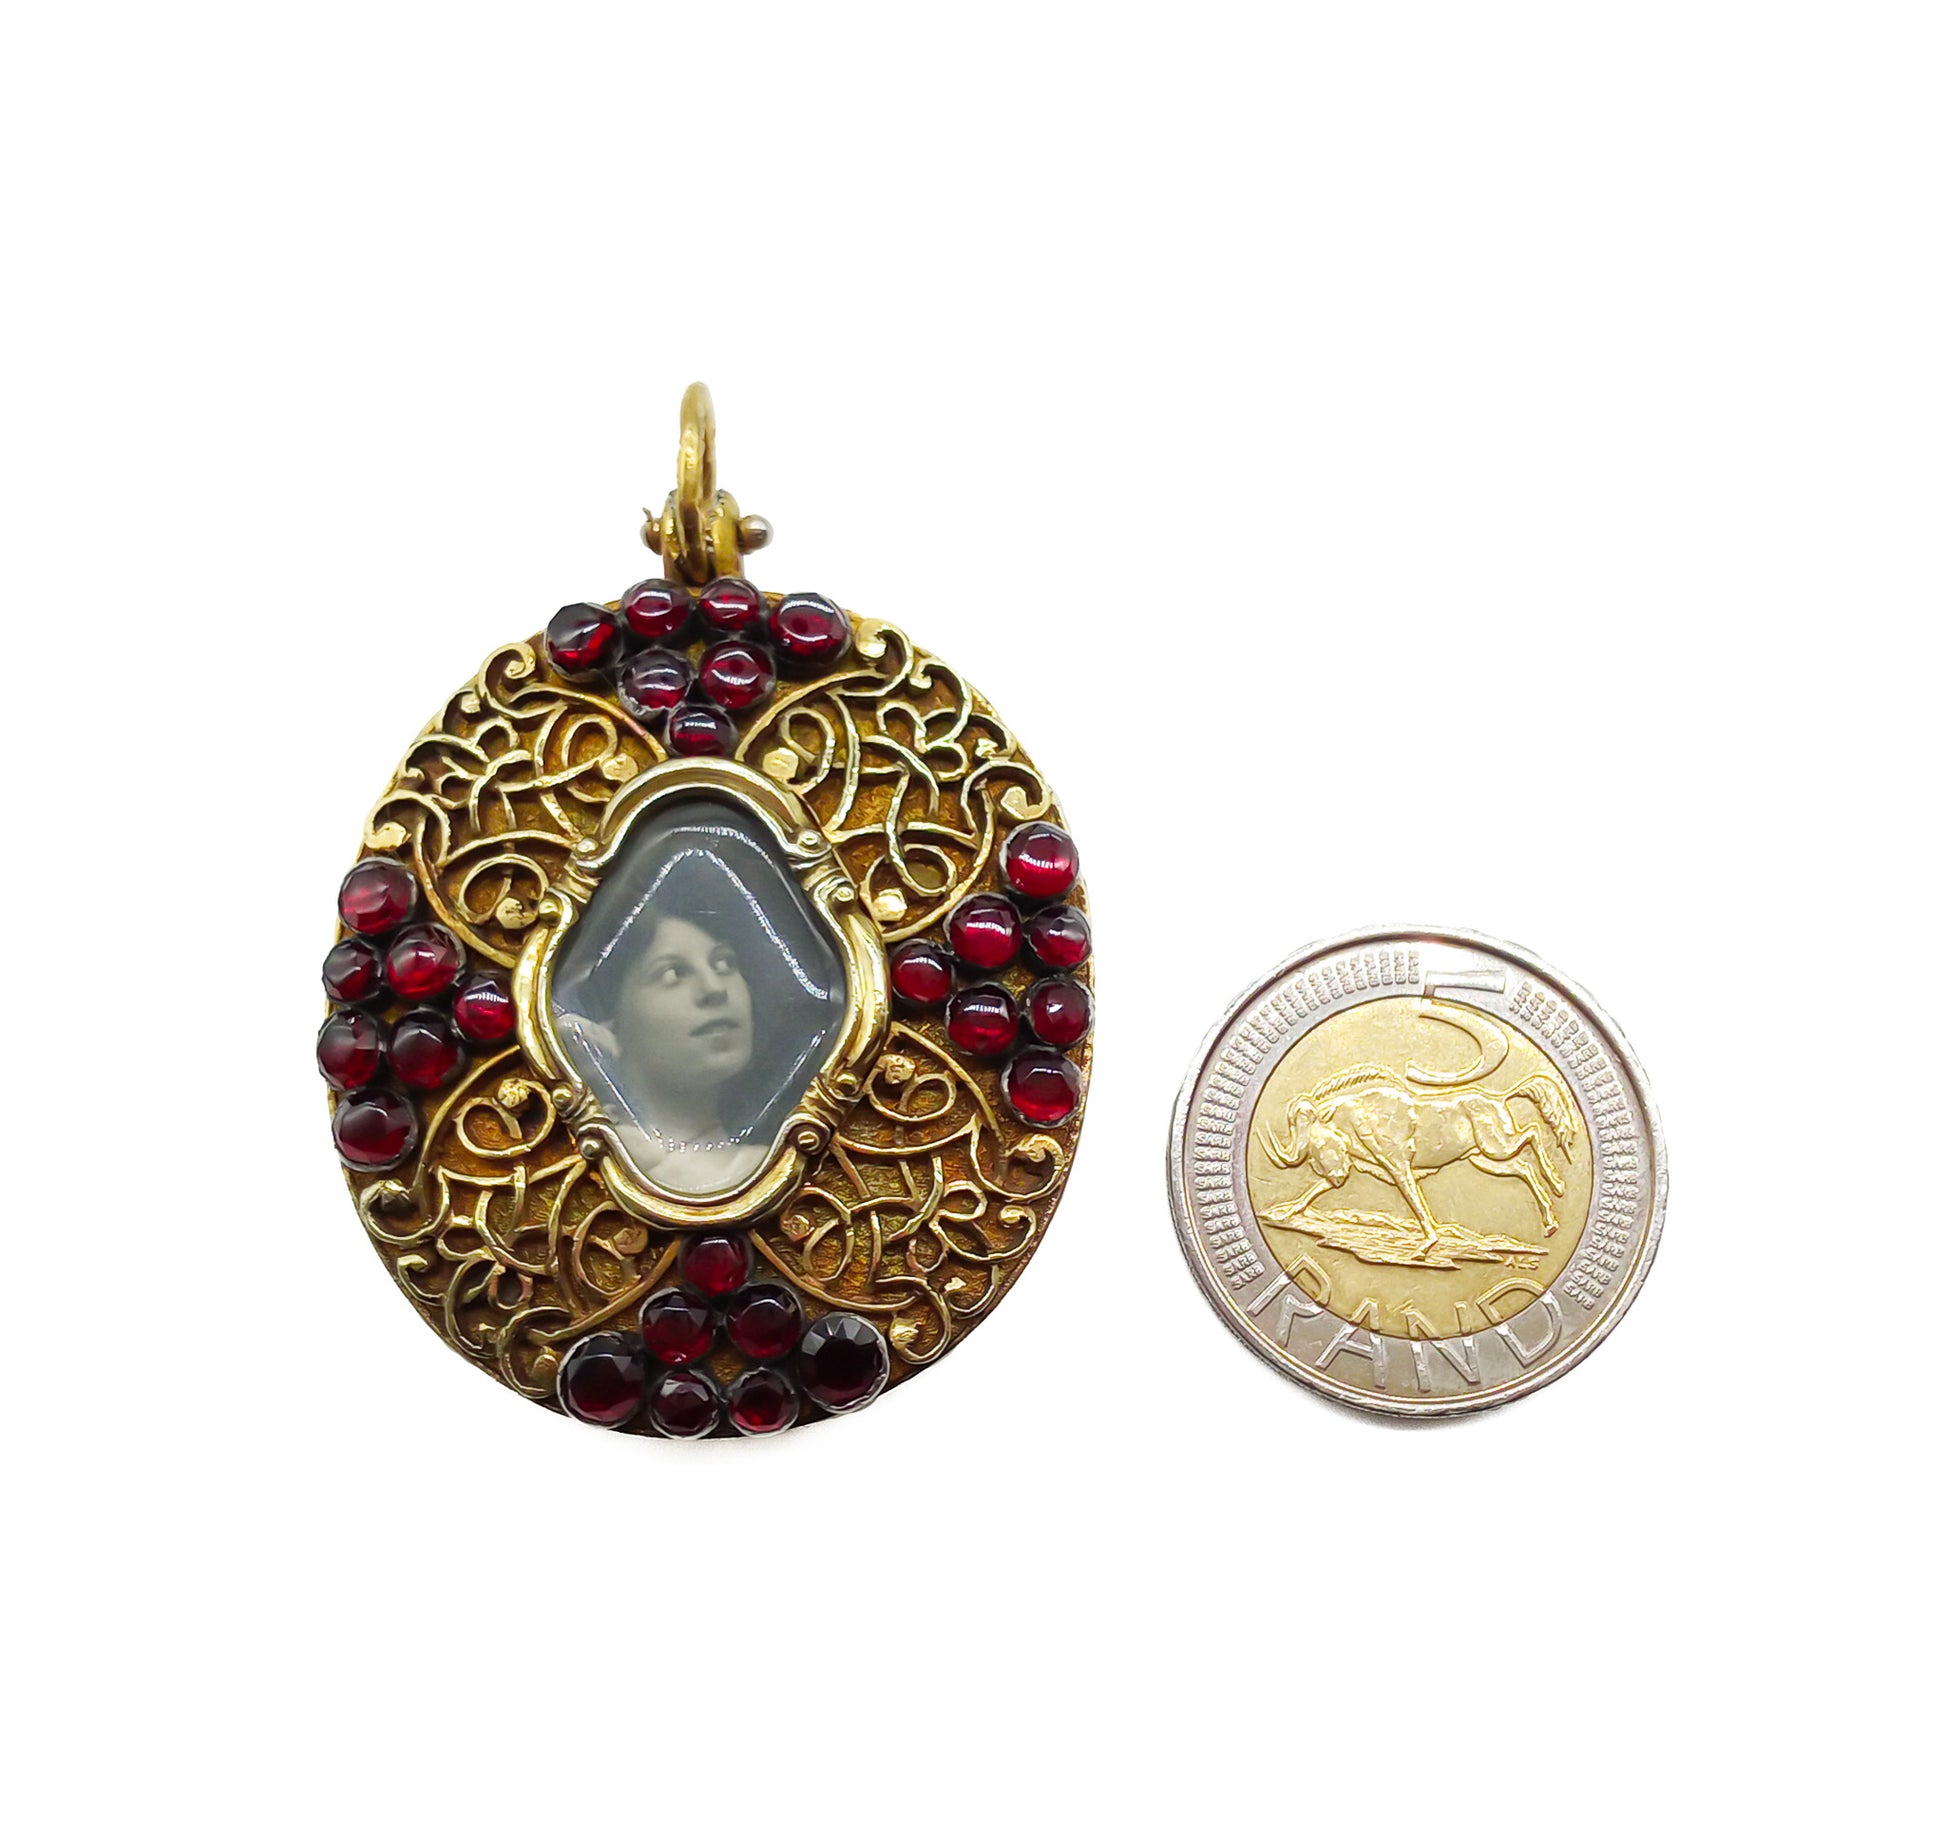 Unique Victorian silver gilt mourning pendant with ornate detail, set with twenty-eight deep red garnets.